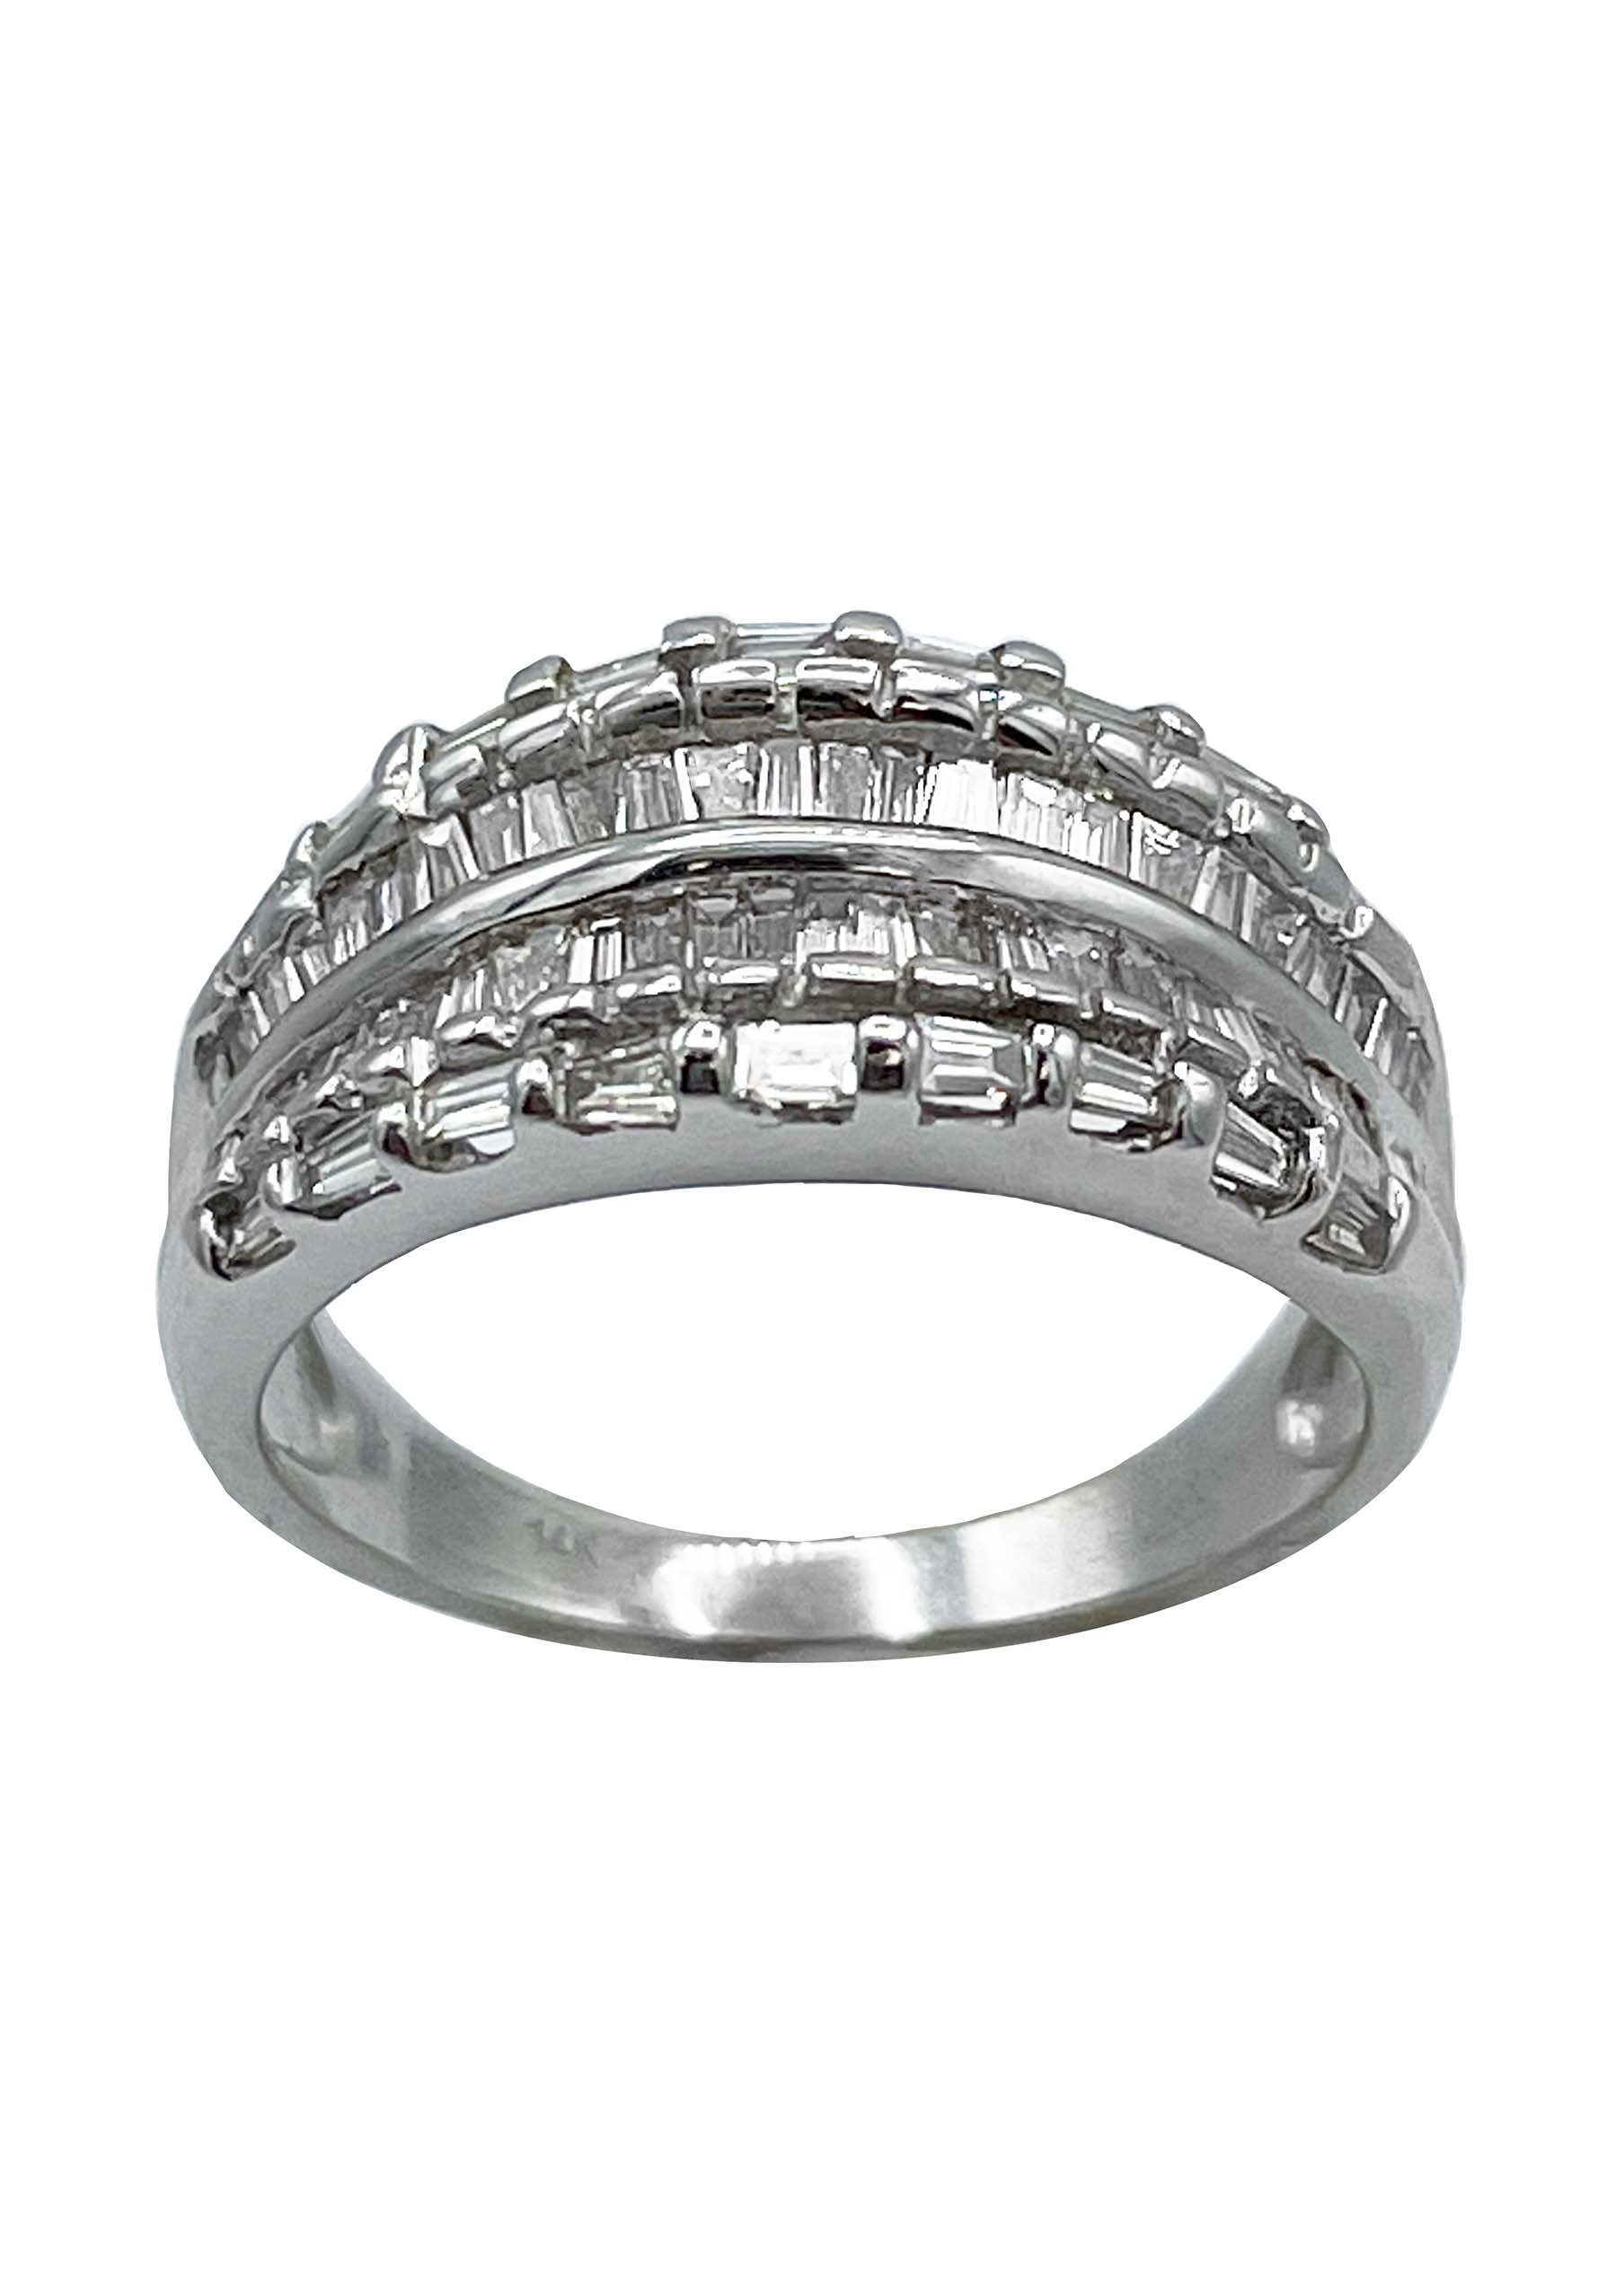 14k White Gold Ring with Baguette Diamonds Image